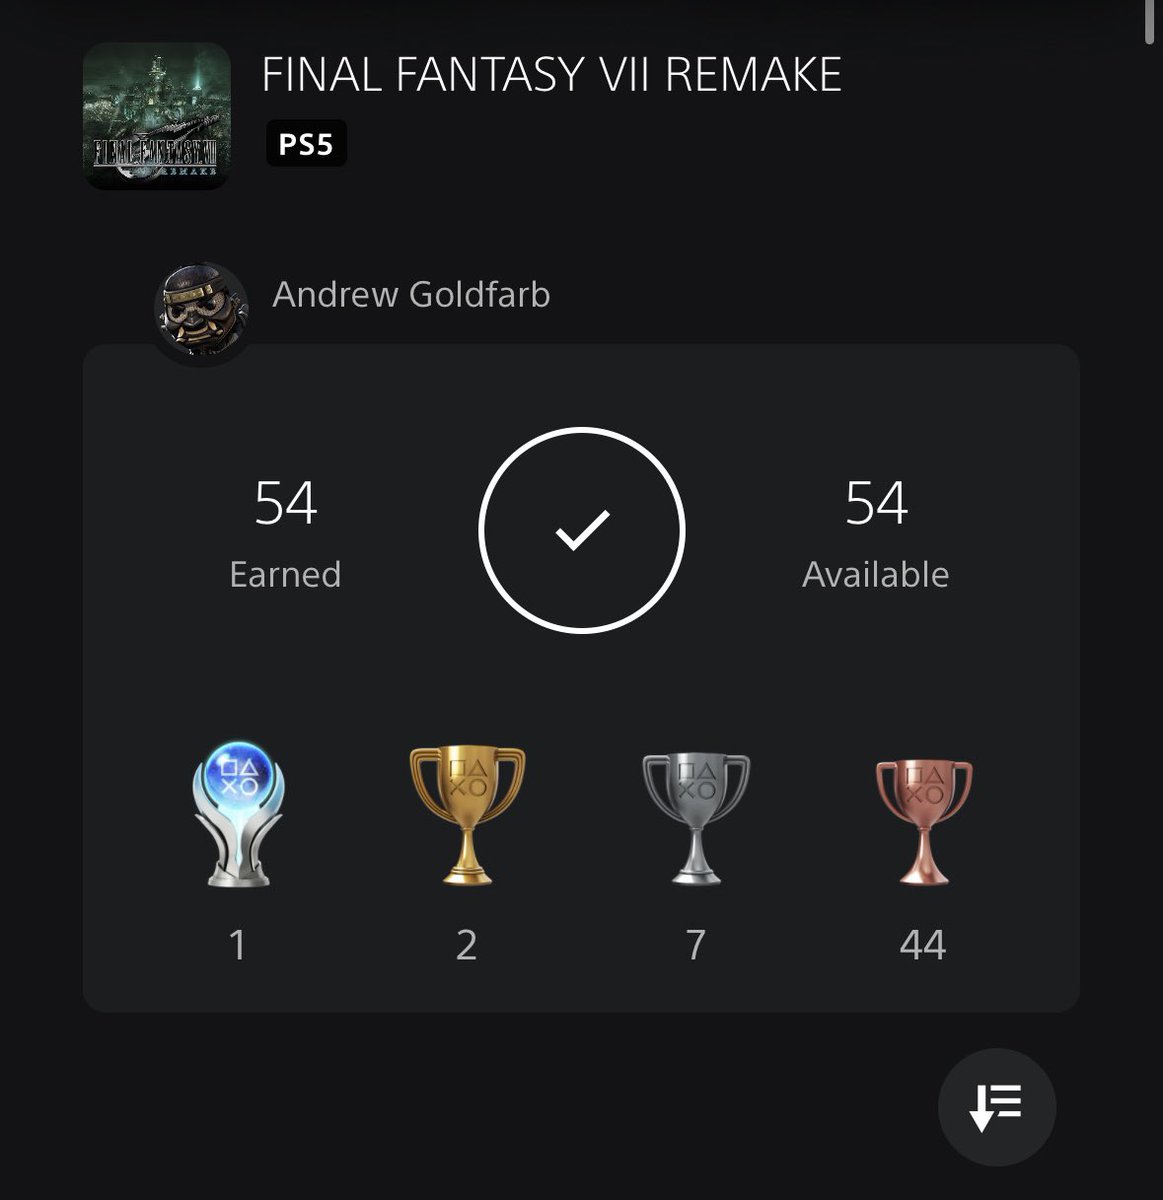 went back and finally got the FF7 remake platinum just in time for rebirth. I’m counting the days at this point